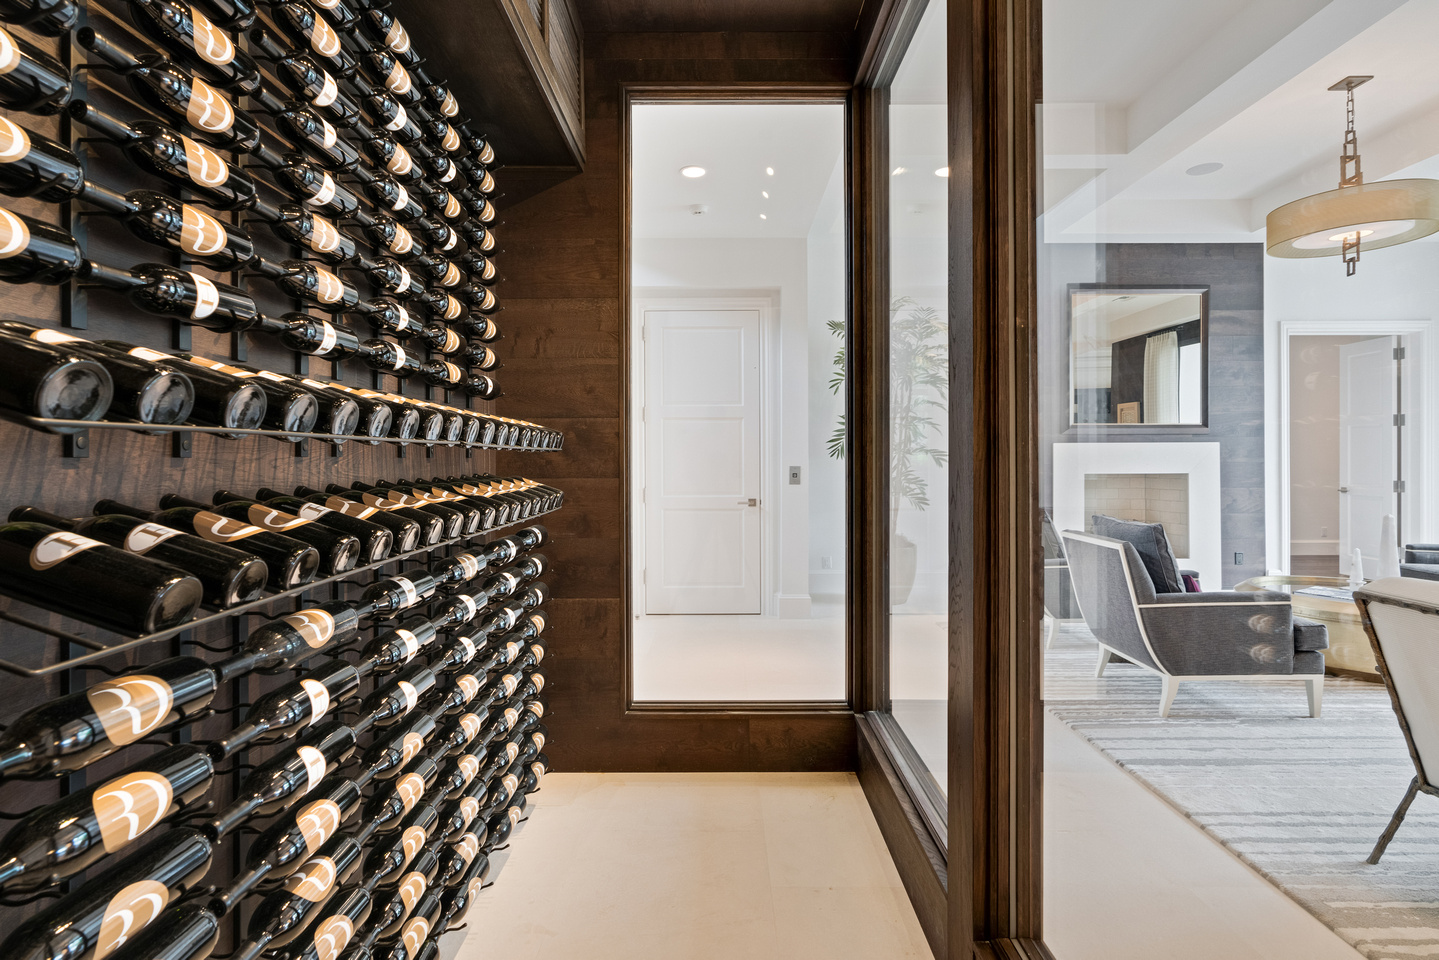 CLIMATE CONTROLLED WINE CELLAR